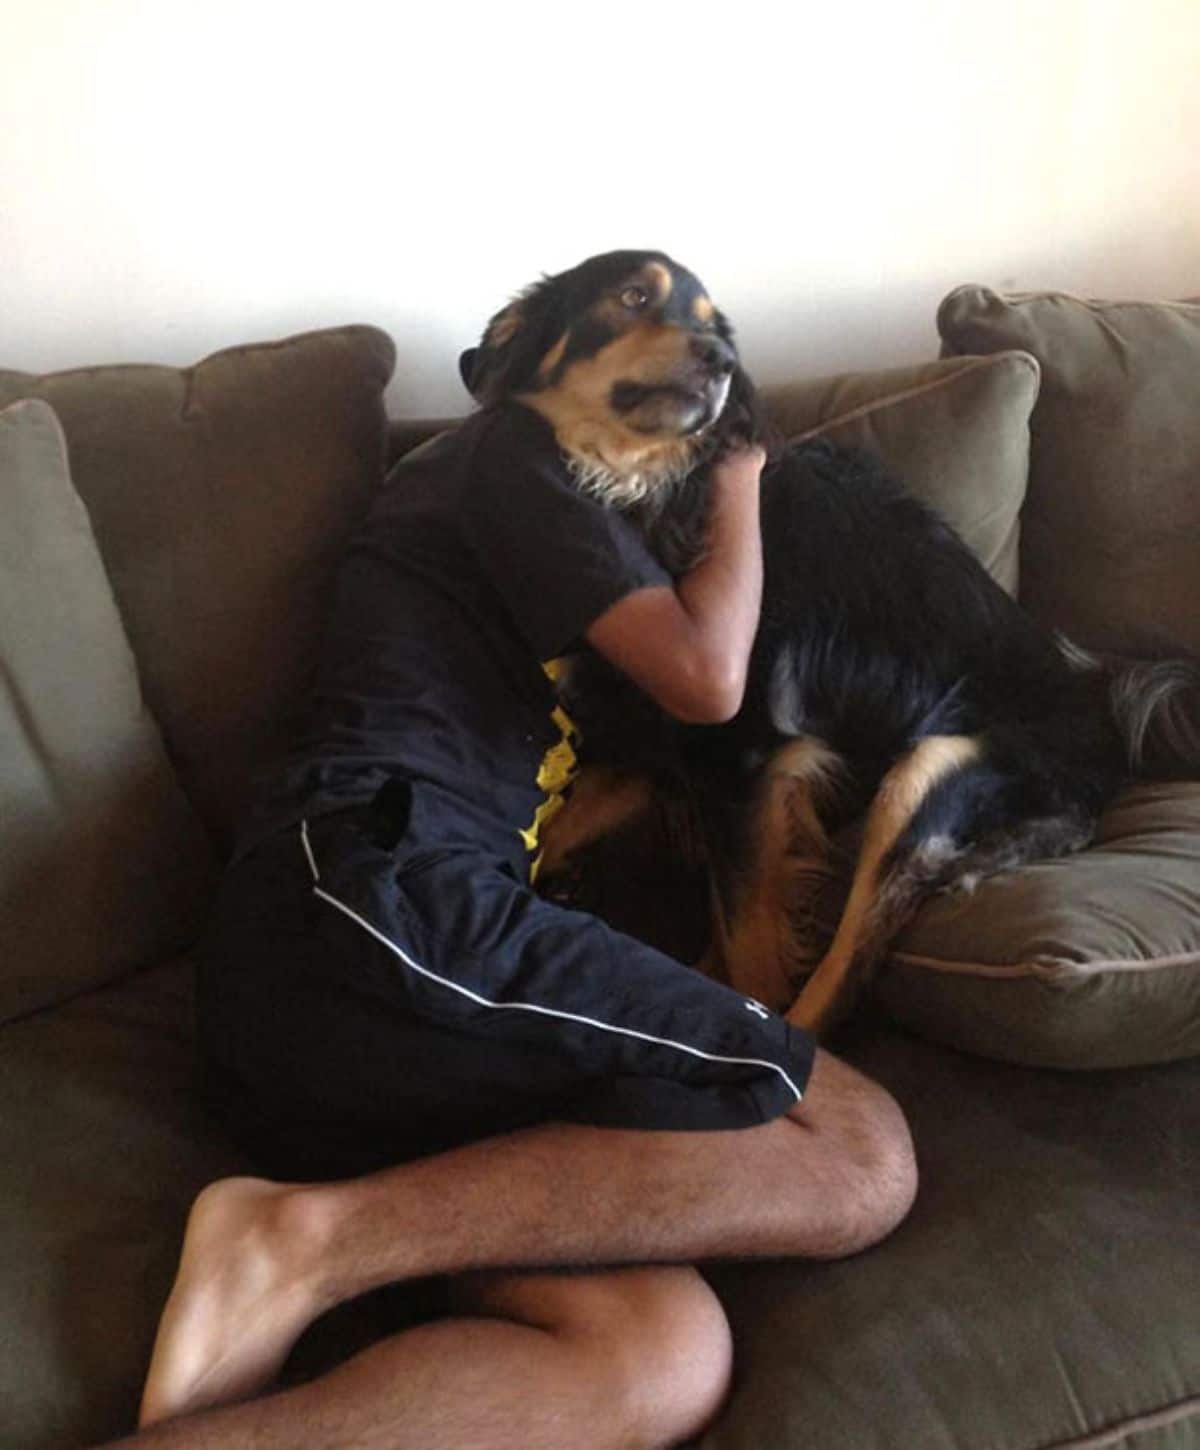 brown and black dog and man on a grey sofa hugging with the man looking like he ha a dog head